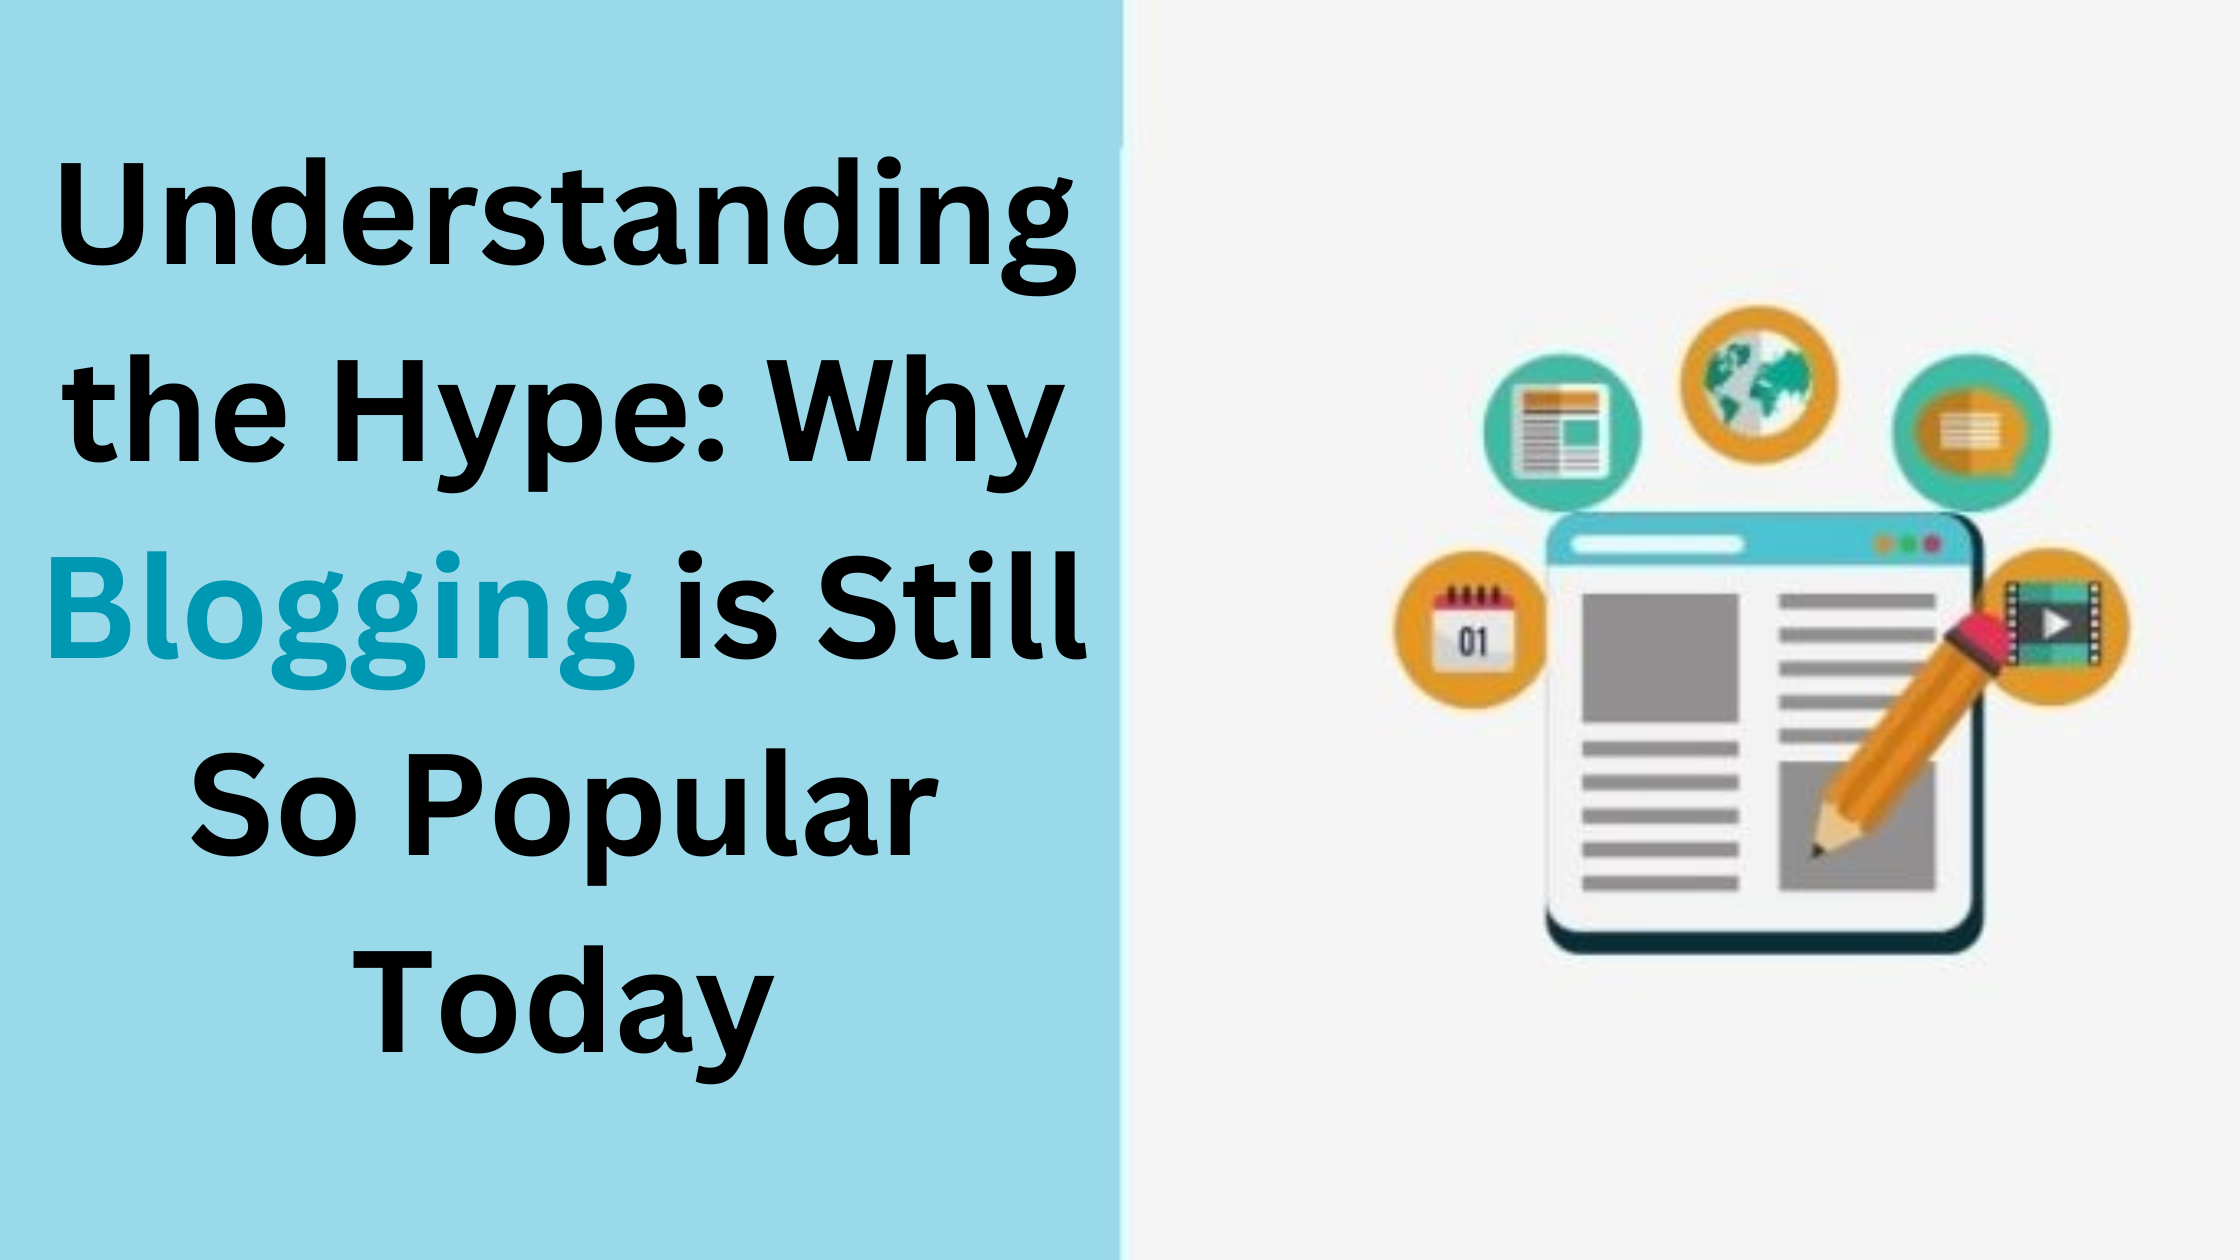 Understanding the Hype: Why Blogging is Still So Popular Today